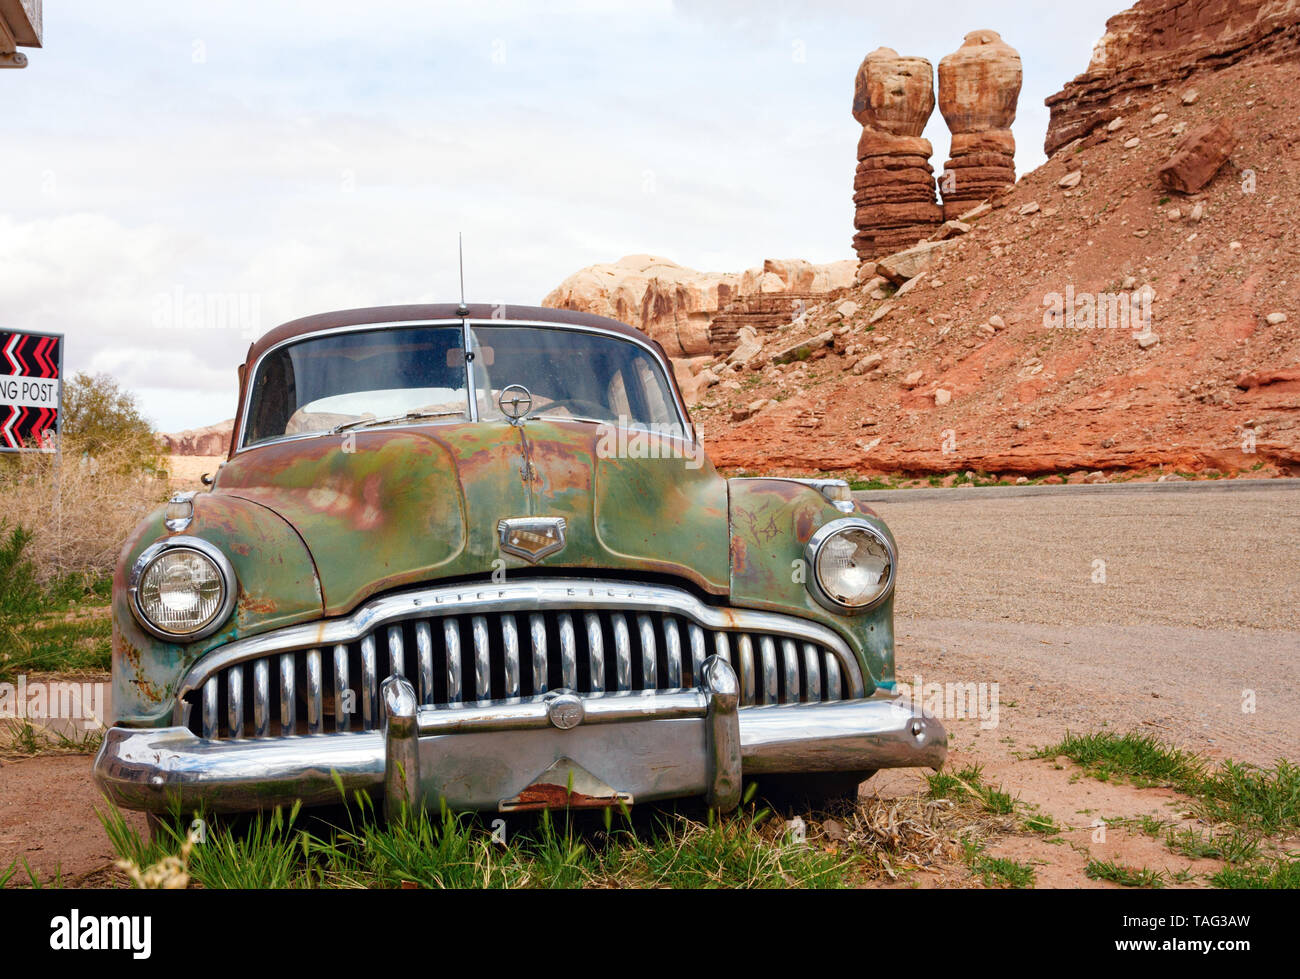 BLUFF, UTAH, USA - APRIL 17, 2013: Old, rusty 1949 Buick Super car parked near the Cow Canyon Trading Post along the U.S. Route 191 with the Bluff Twi Stock Photo